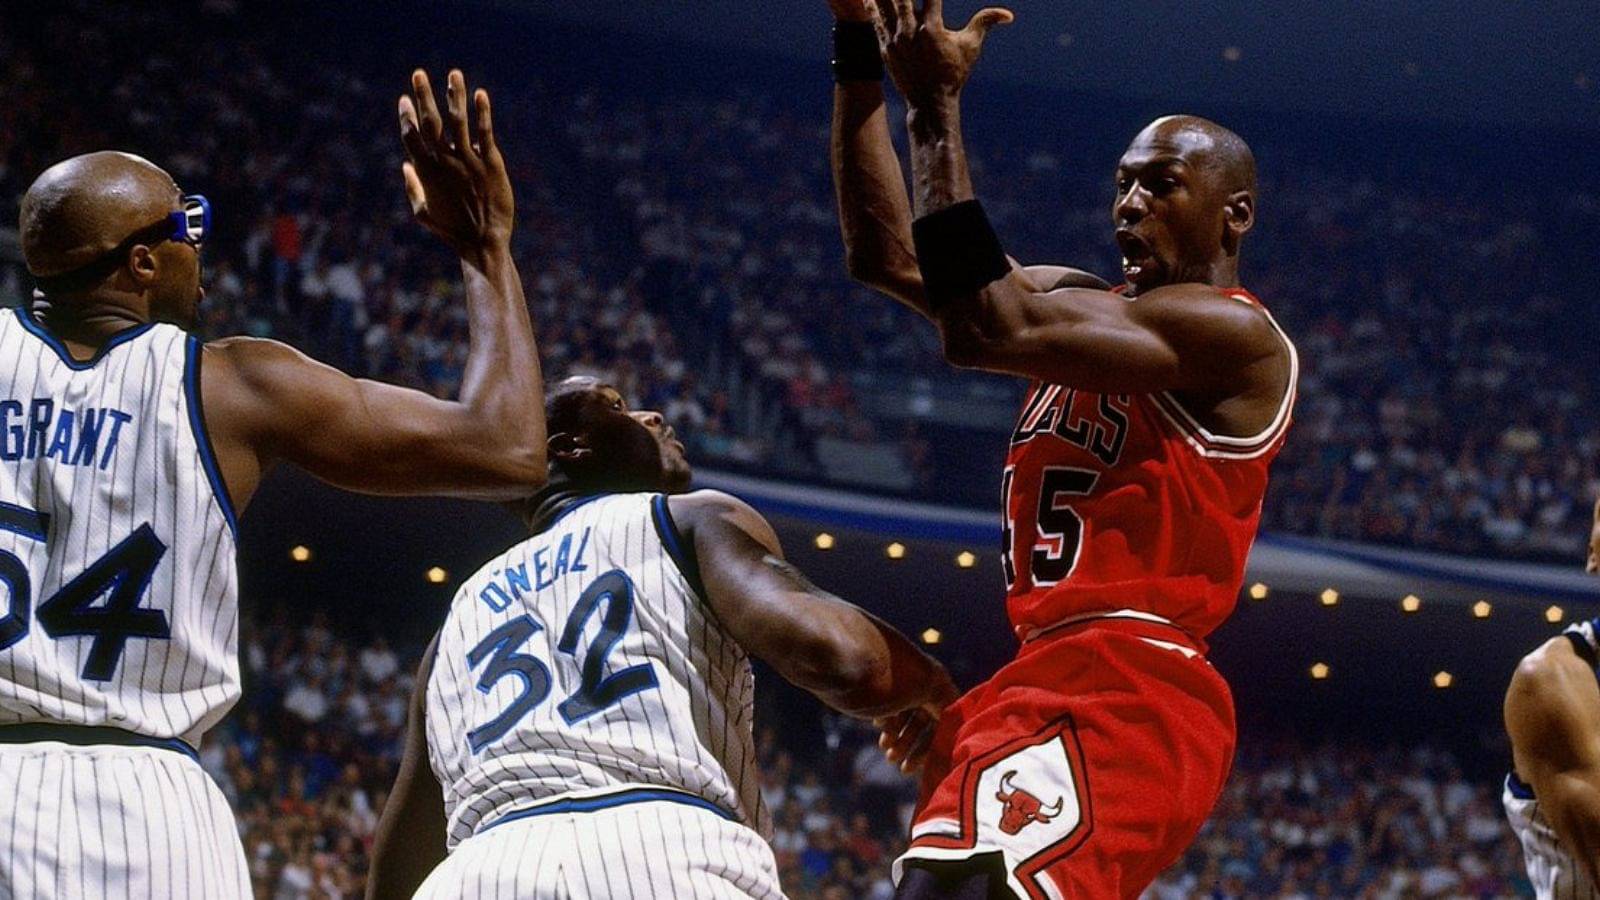 Michael Jordan and Shaquille O’Neal’s $35 million teammate believes MJ's 6-0 wouldn’t have happened if he weren't injured